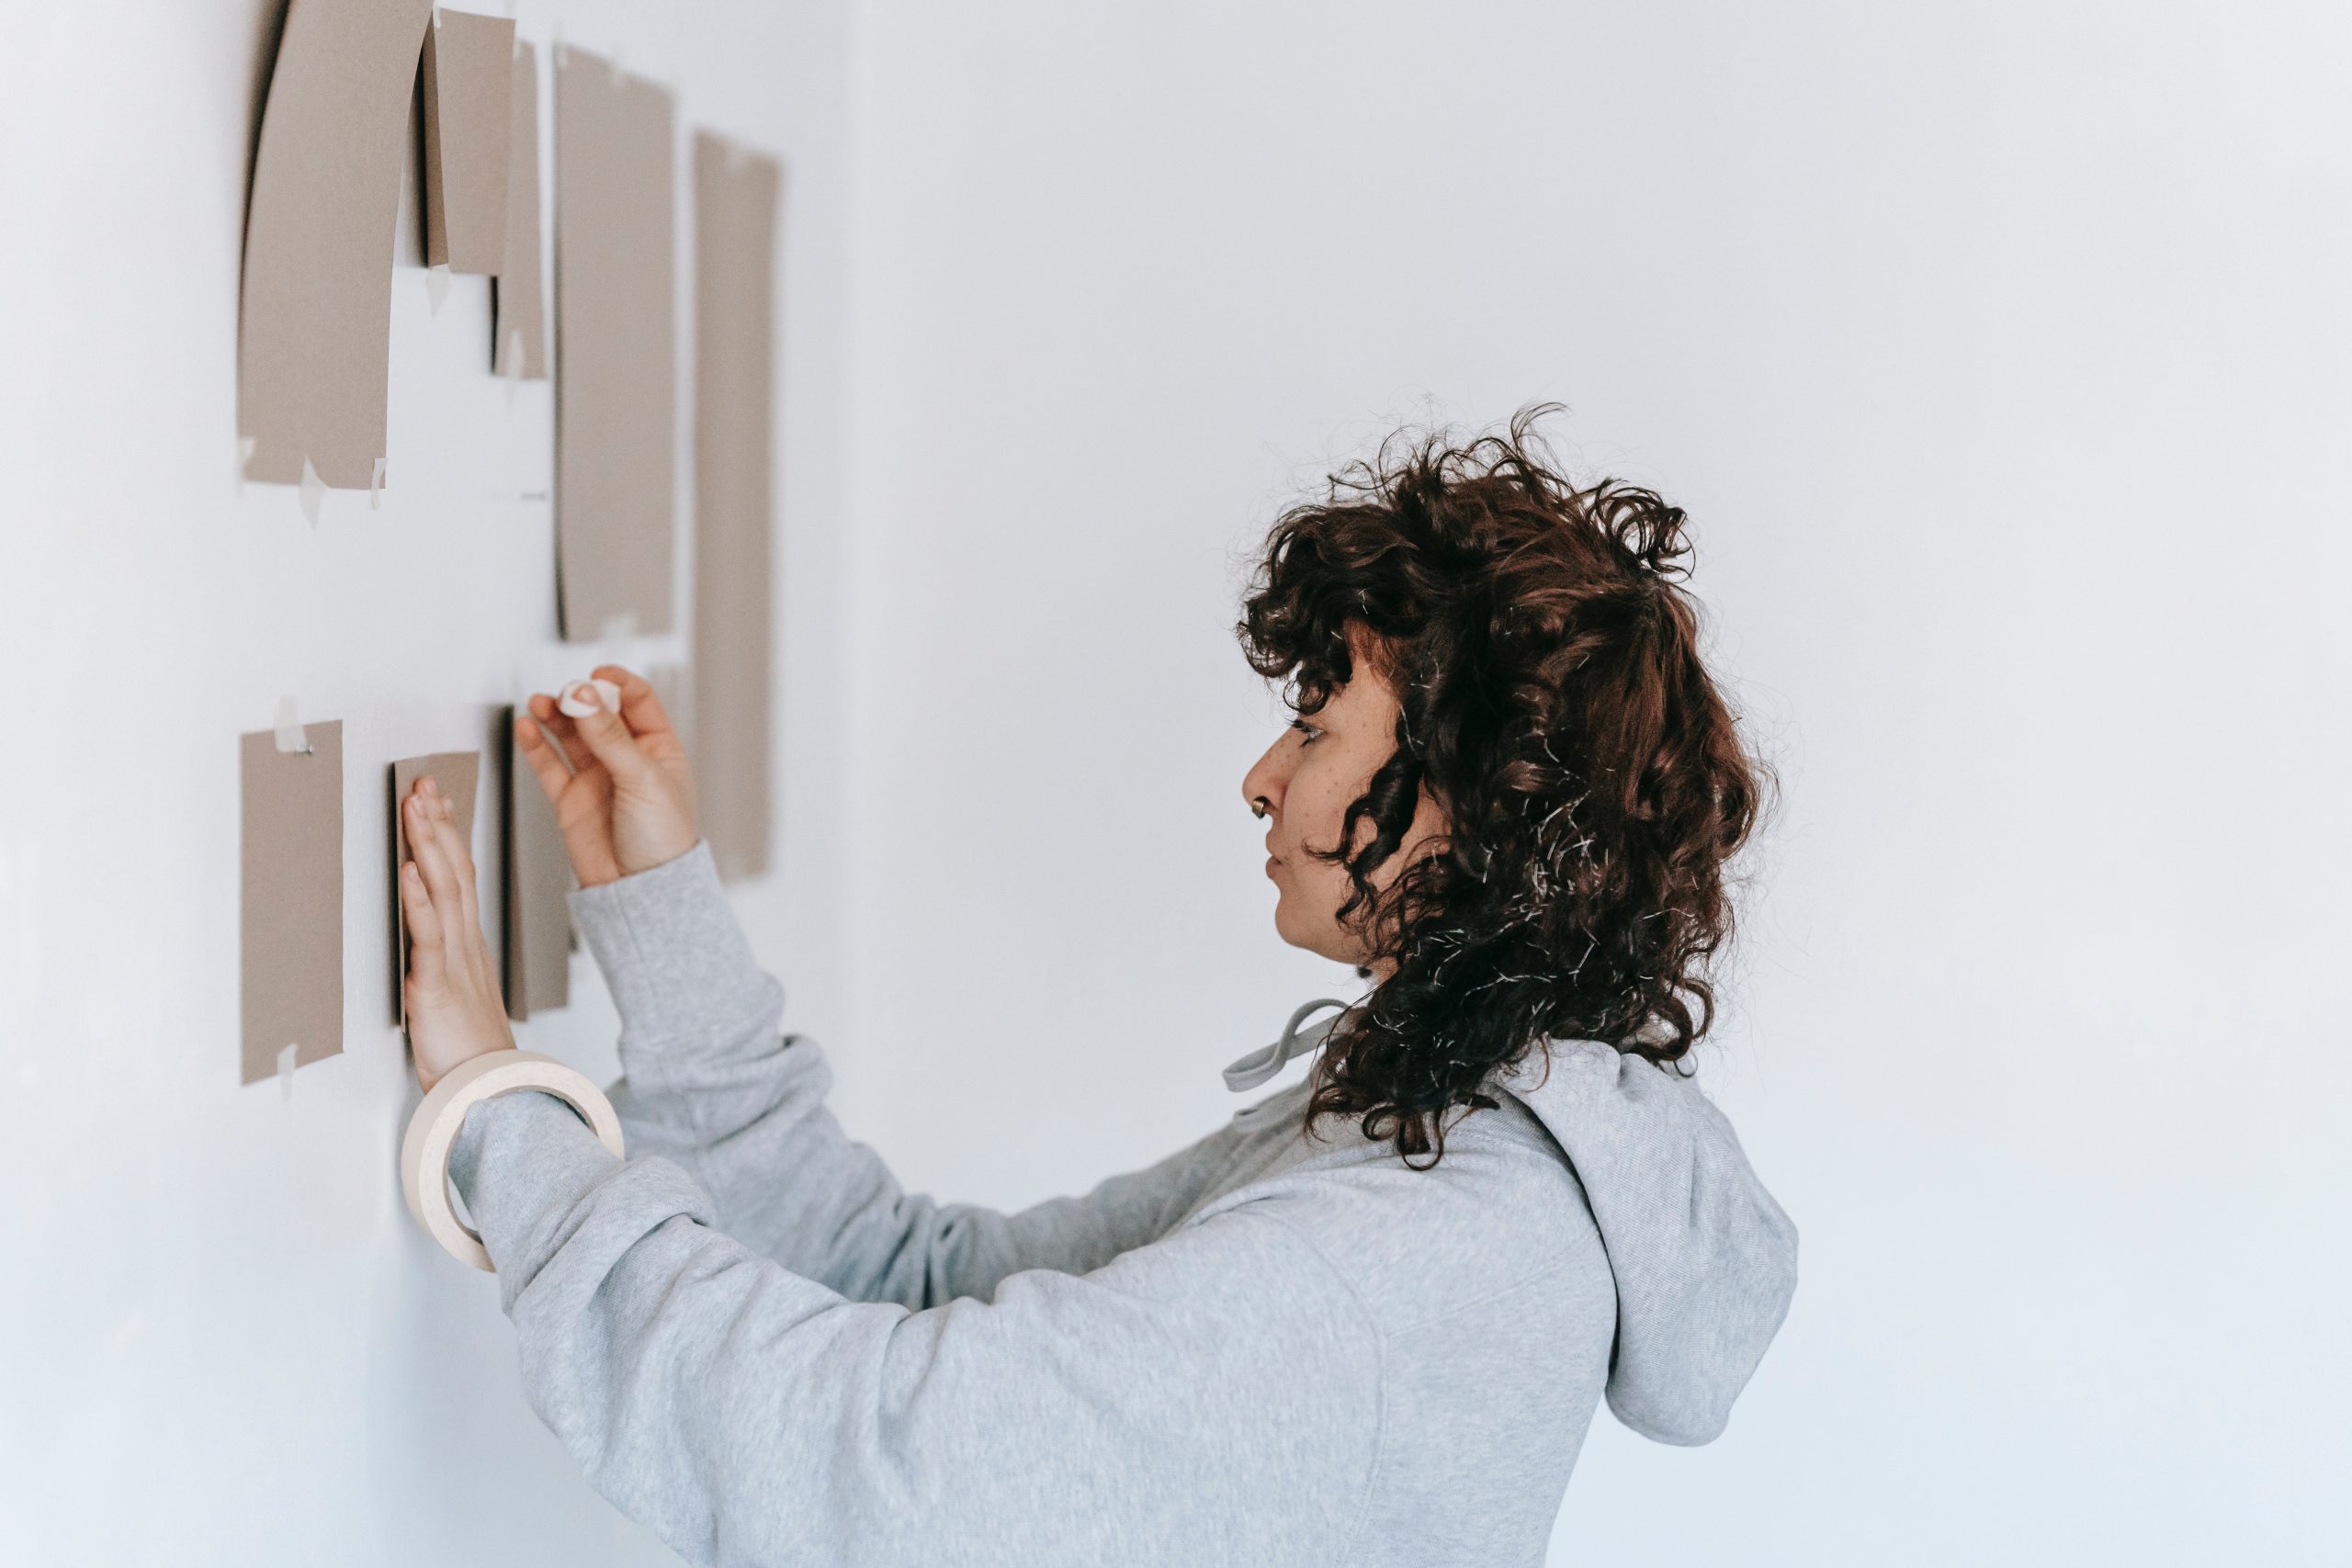 A woman trying different layouts of where to hang her pictures on the wall.